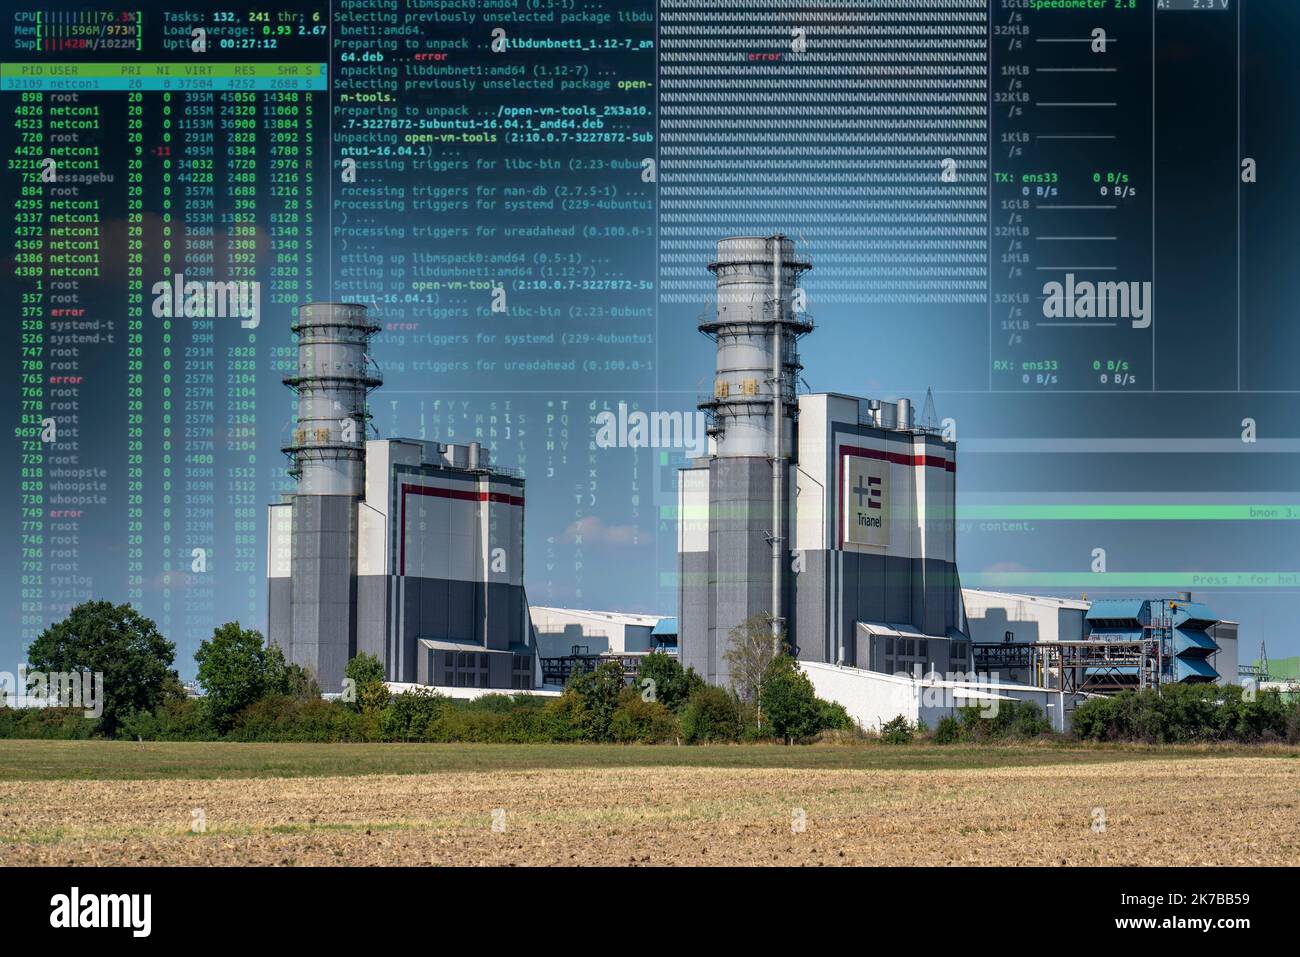 Symbolic image Critical infrastructure, blackout danger, cyberterrorism, Trianel gas and steam combined cycle power plant Hamm-Uentrop, two power plan Stock Photo